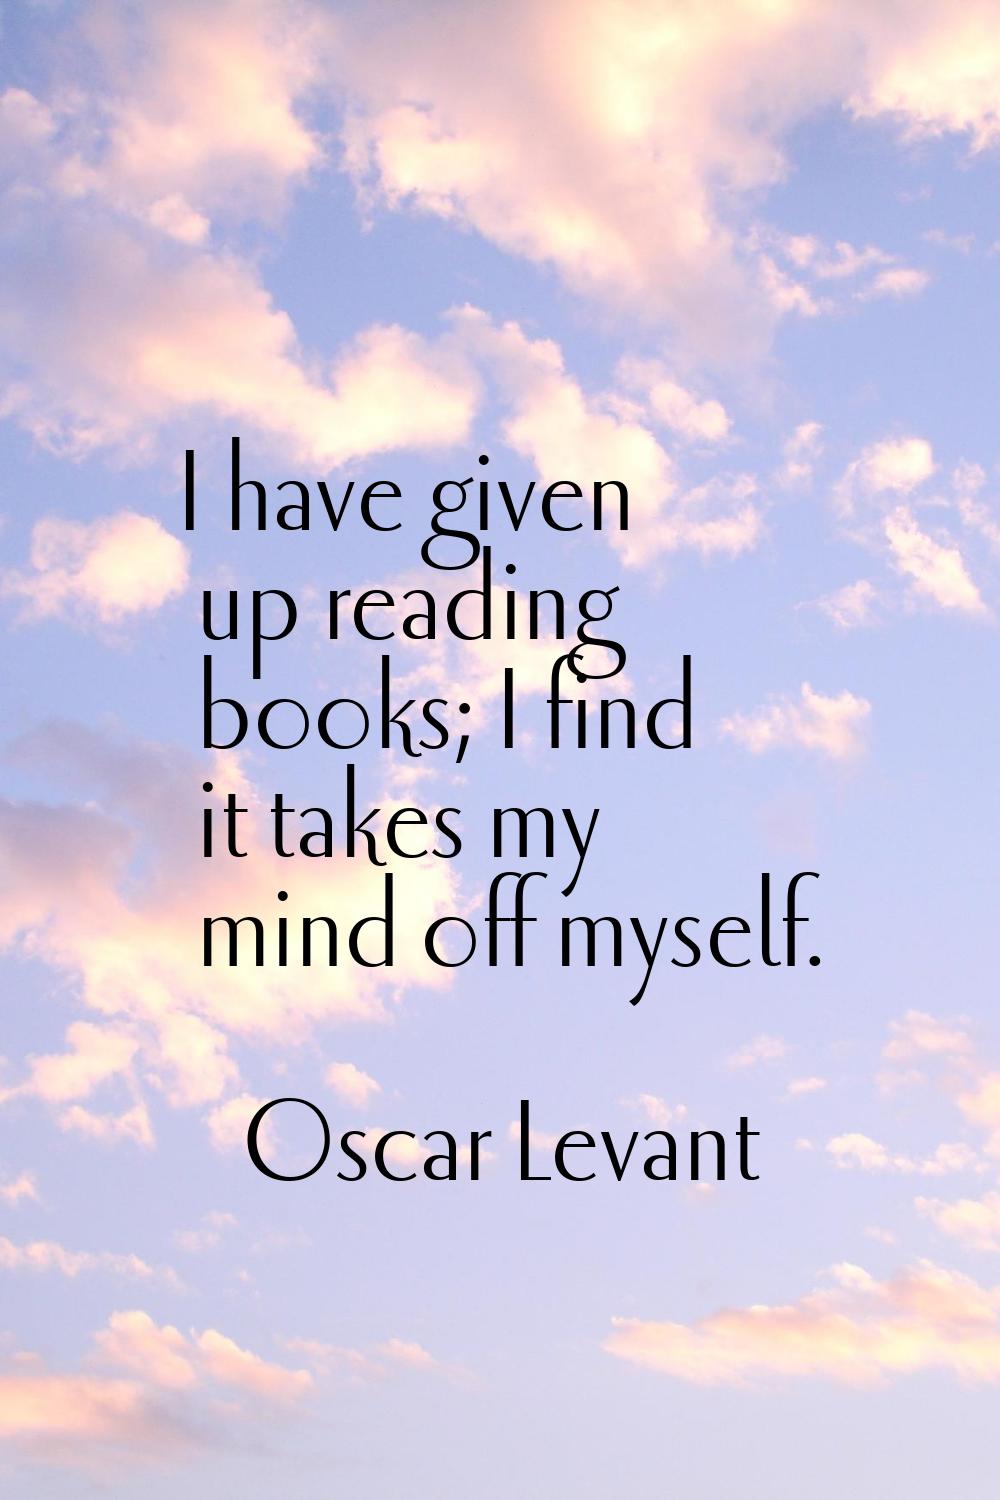 I have given up reading books; I find it takes my mind off myself.